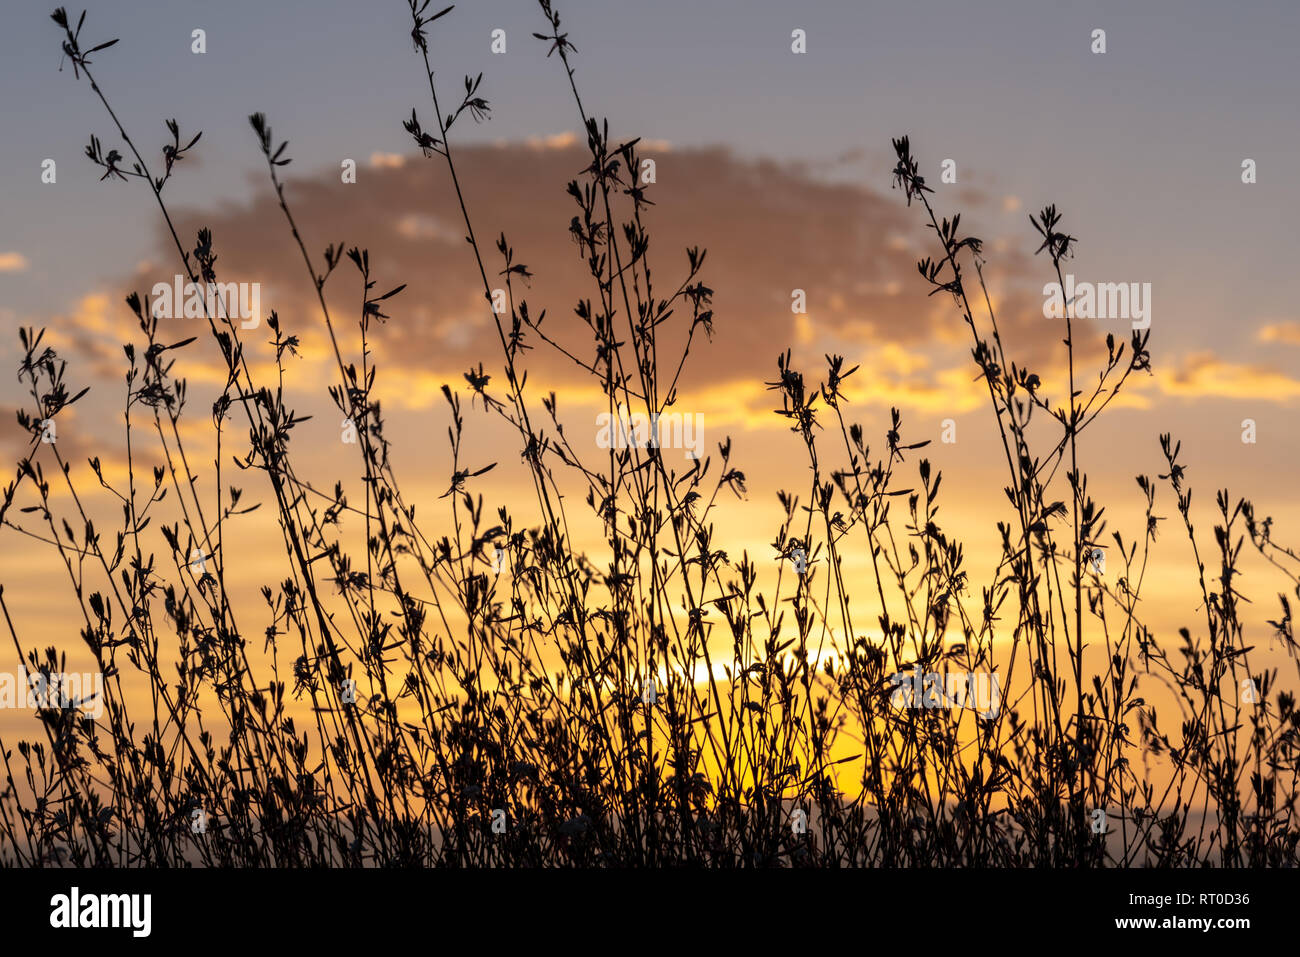 A Gaura Belleza bush silhouetted against a golden sunset. Stock Photo